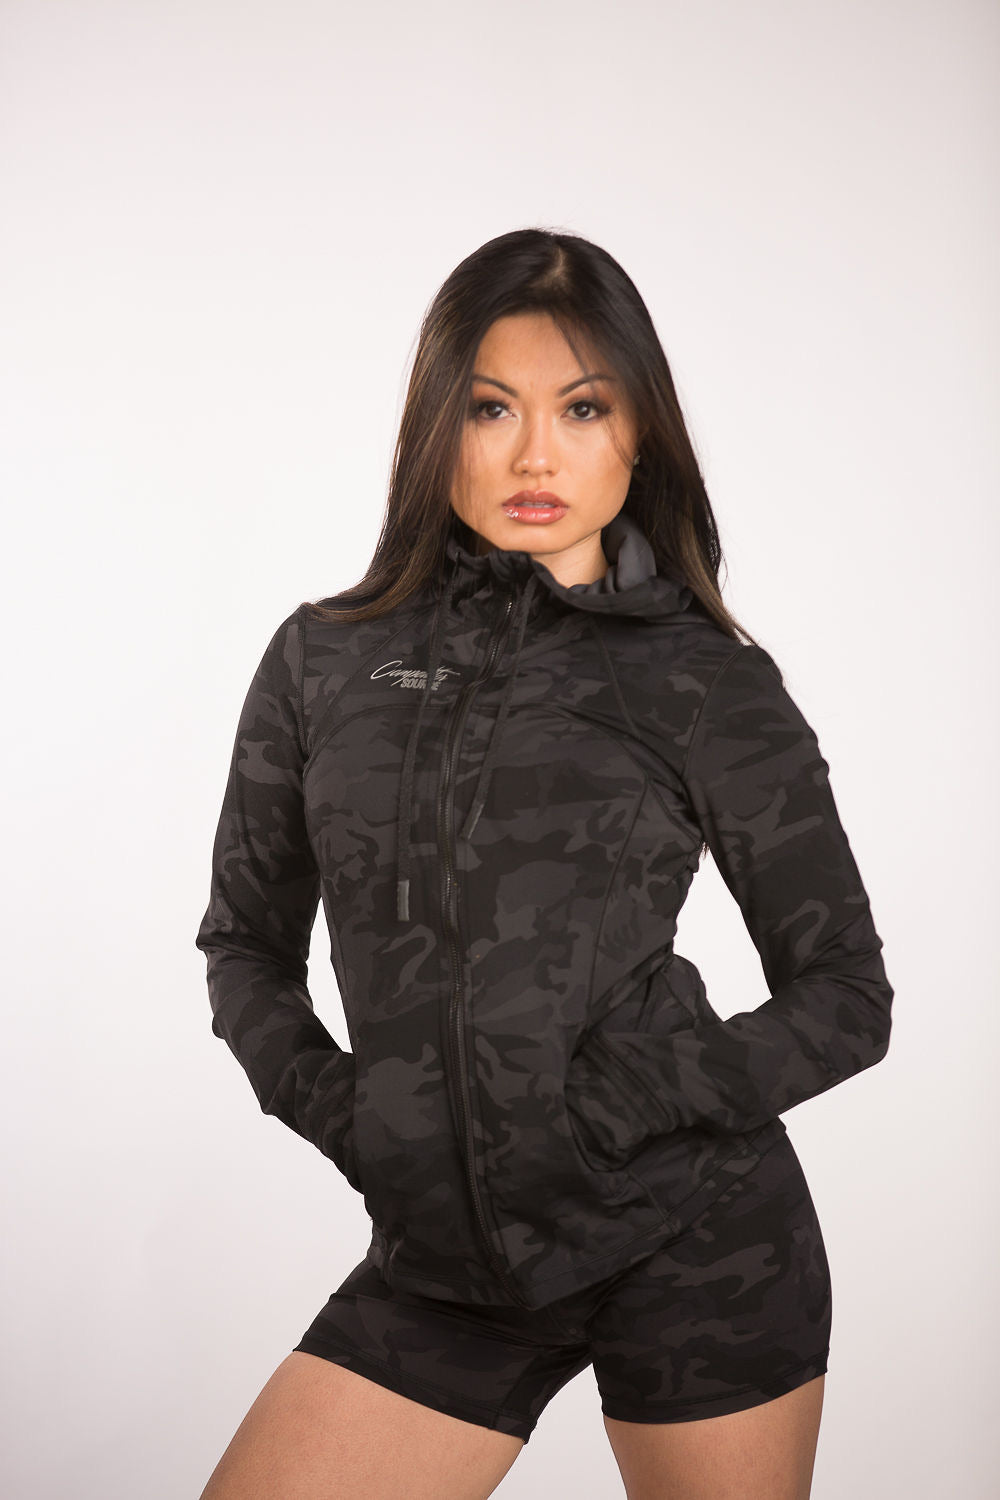 Fall Athletic Jacket - Competitor Source